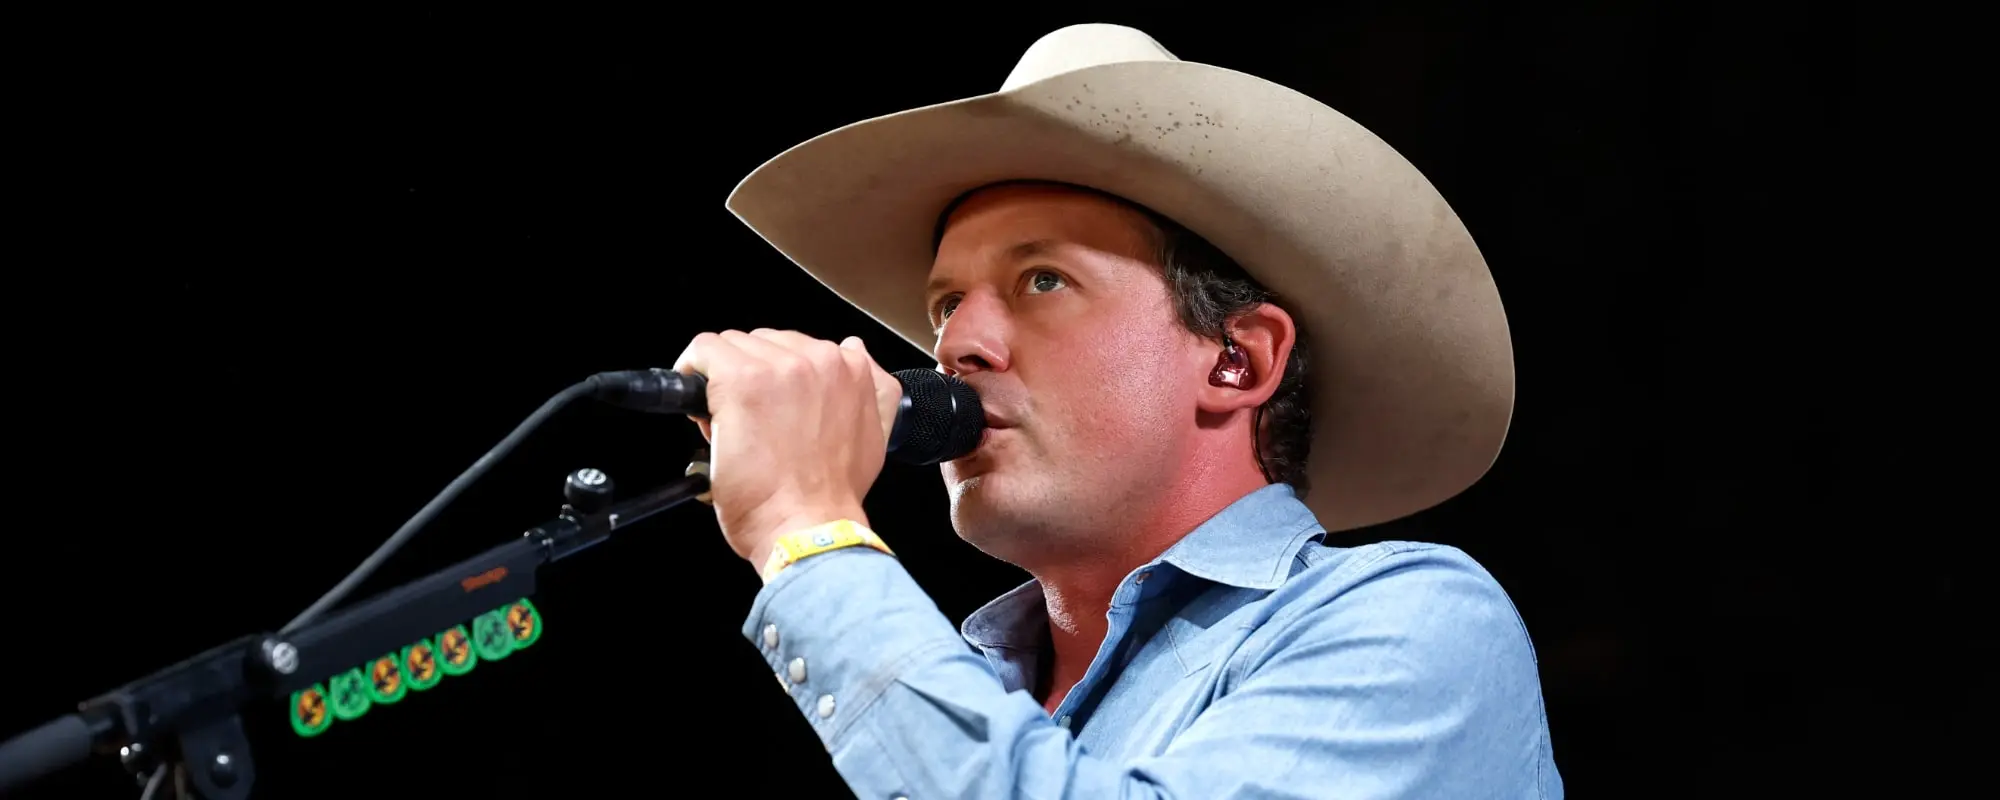 Turnpike Troubadours’ Evan Felker Reflects on His Sobriety: “The Best Thing That Ever Happened to Me”